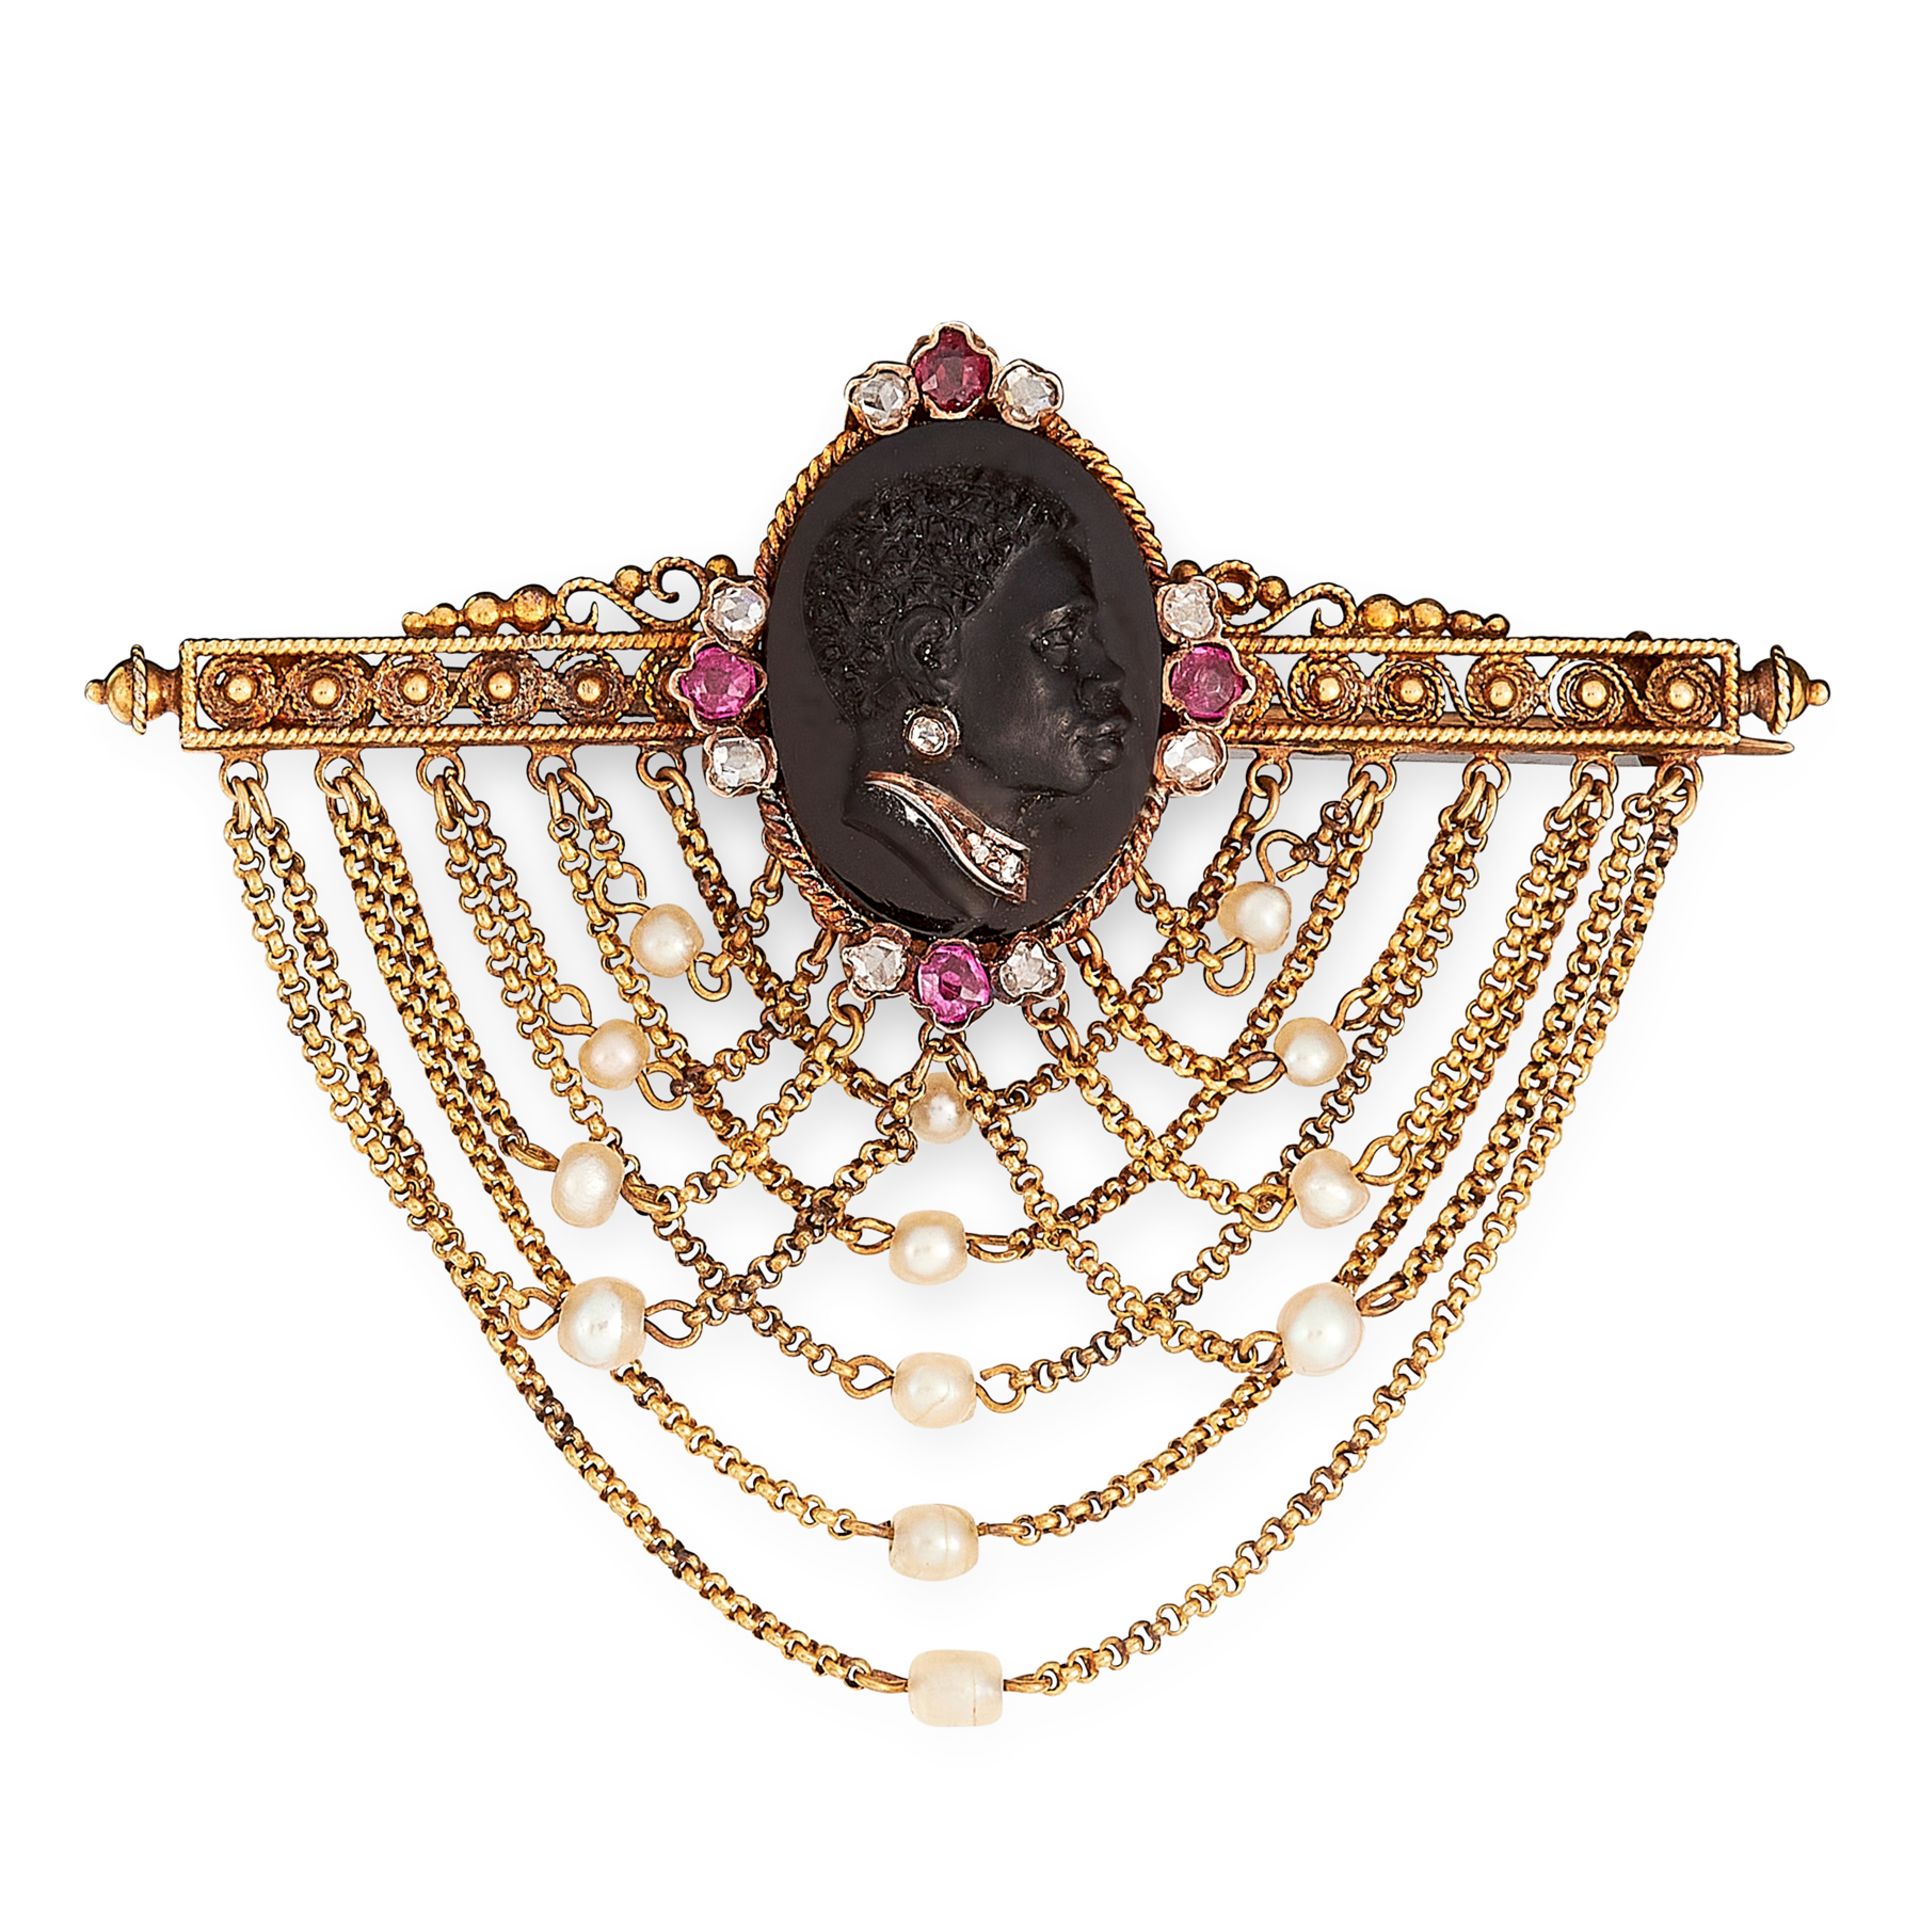 AN ANTIQUE RUBY, DIAMOND AND PEARL BLACKAMOOR CAMEO BROOCH in yellow gold, set with an oval carved